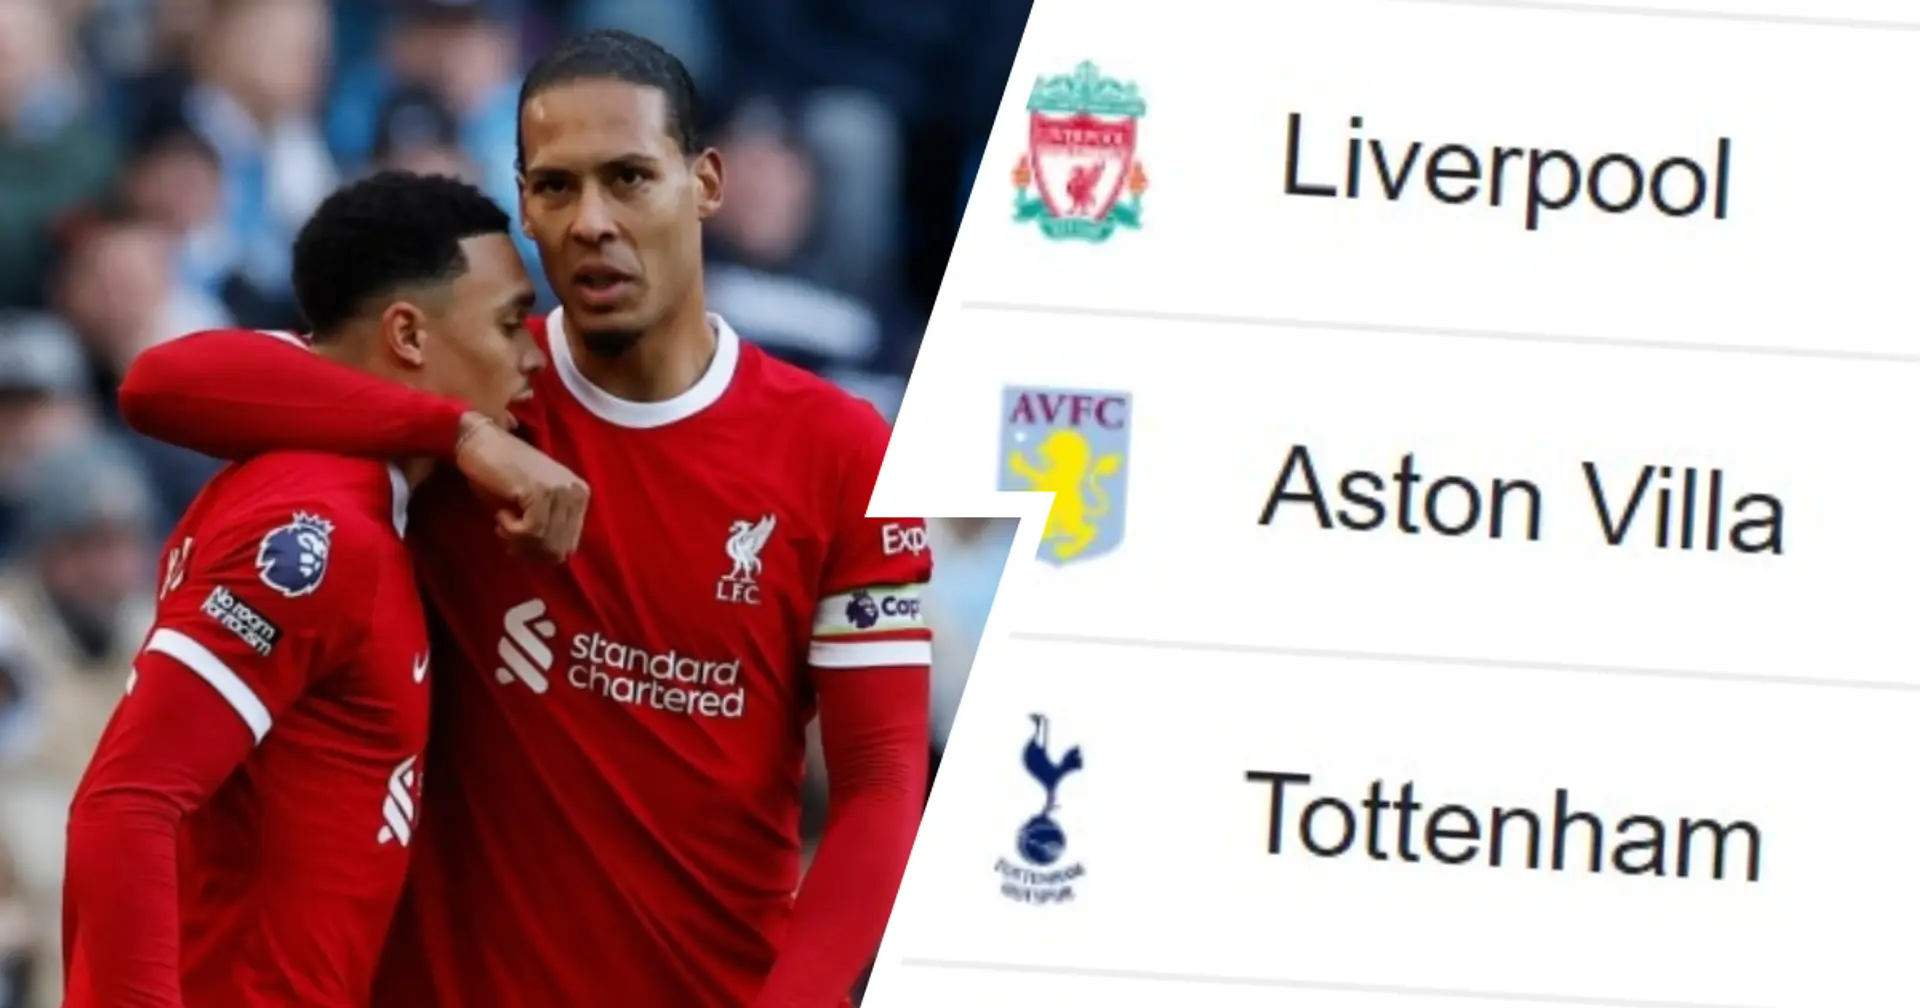 Liverpool level with Aston Villa: Premier League standings after Sunday matches